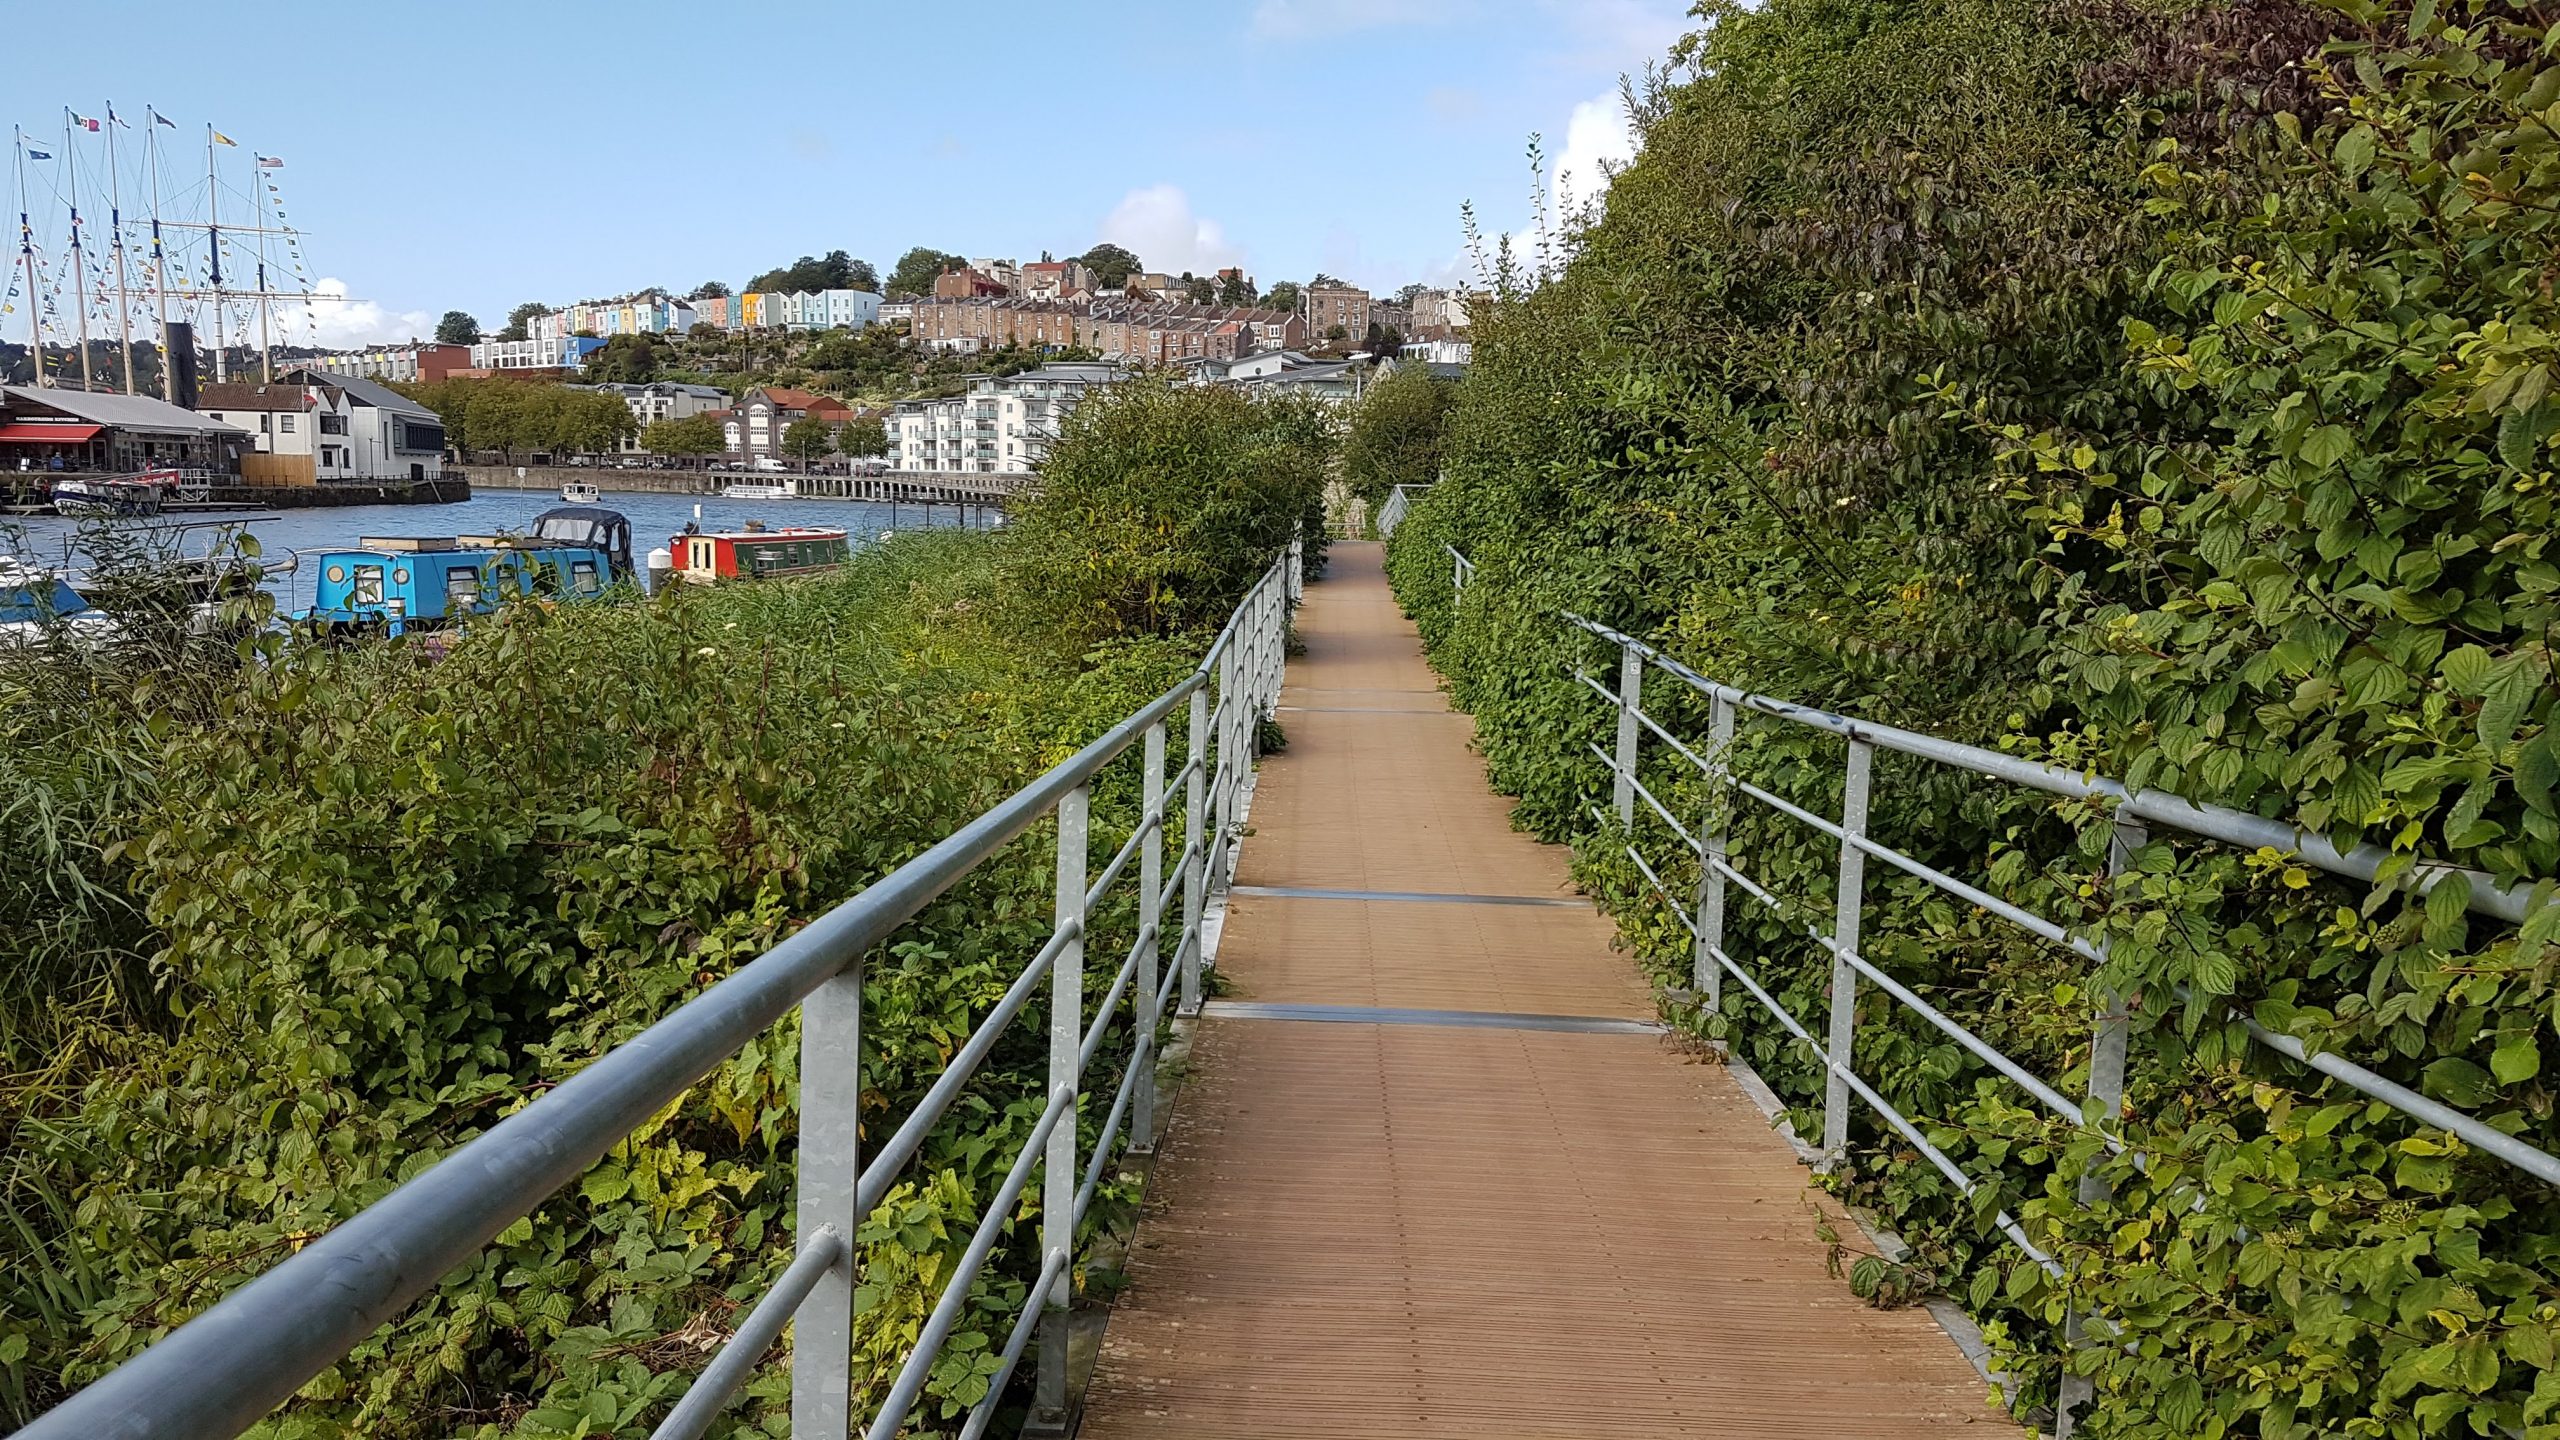 Wooden walkway through vegetation and reed beds either side. River and buildings on hill visible in background.